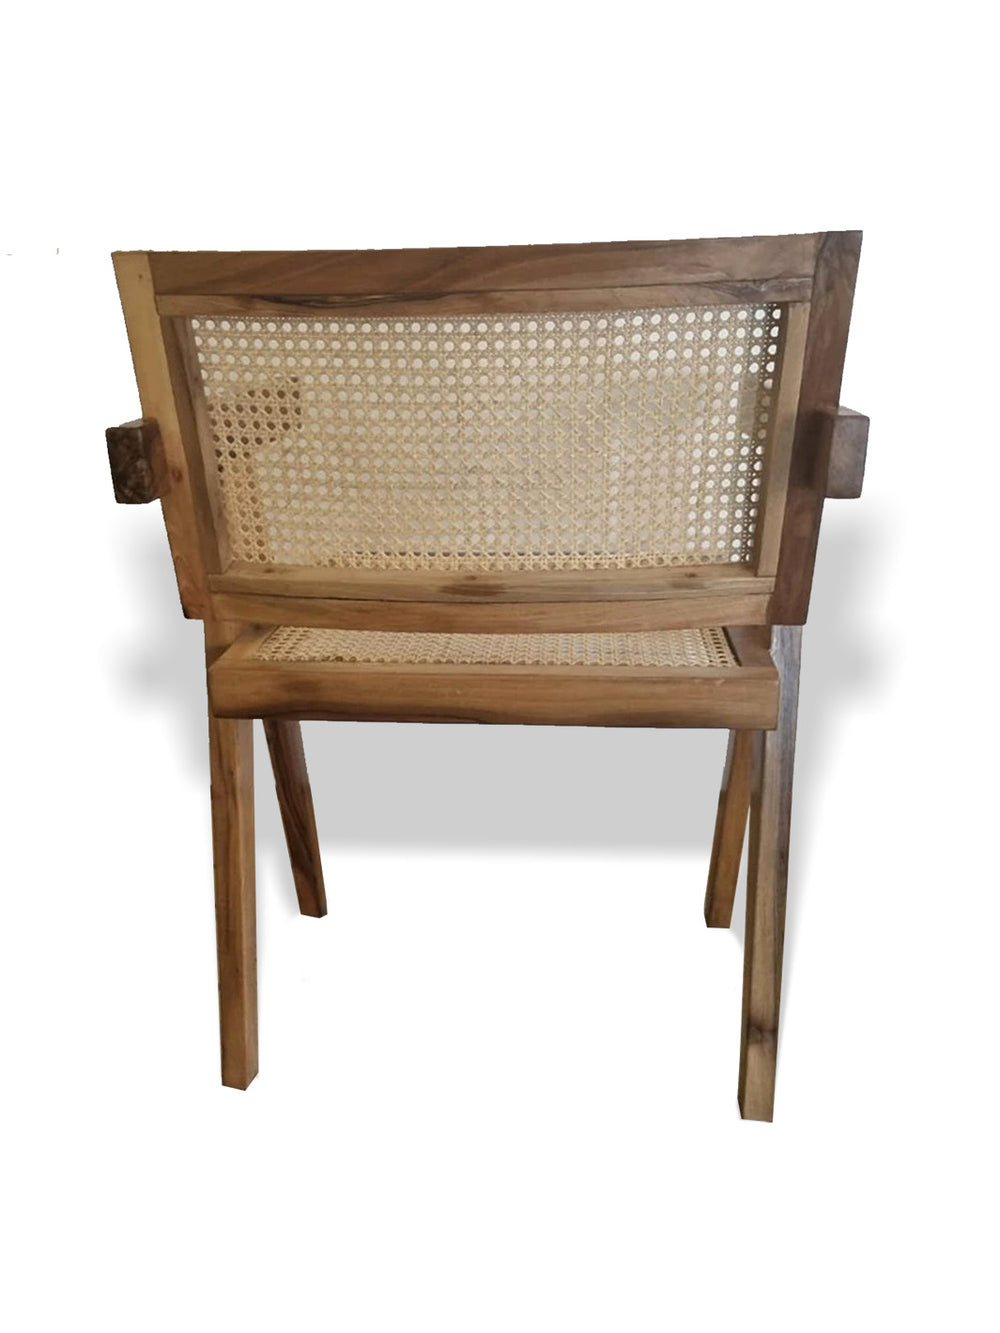 Handcrafted Moroccan Artisanal Drowned Wooden Armchair Libitii Chairs LIB-0024-1